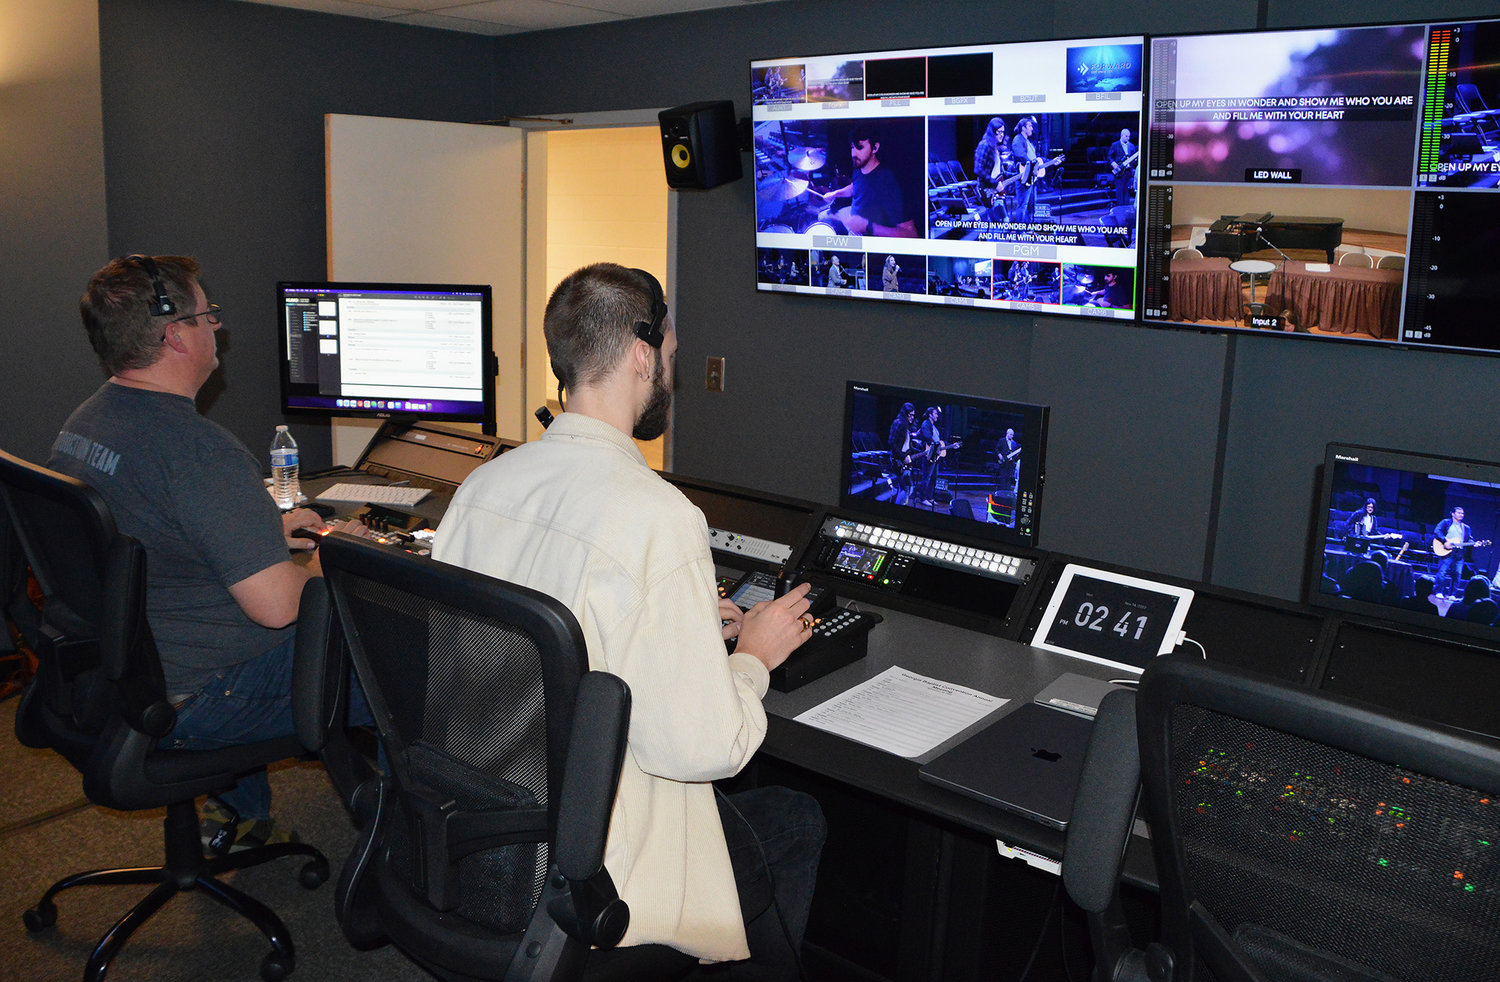 Jonathan Lawhon, left, and Ezra Elliott work the video master control room during the 200th annual meeting of the Georgia Baptist Convention at Warren Baptist Church in Augusta, Ga. Monday, Nov. 14, 2022. (The Index/Henry Durand)